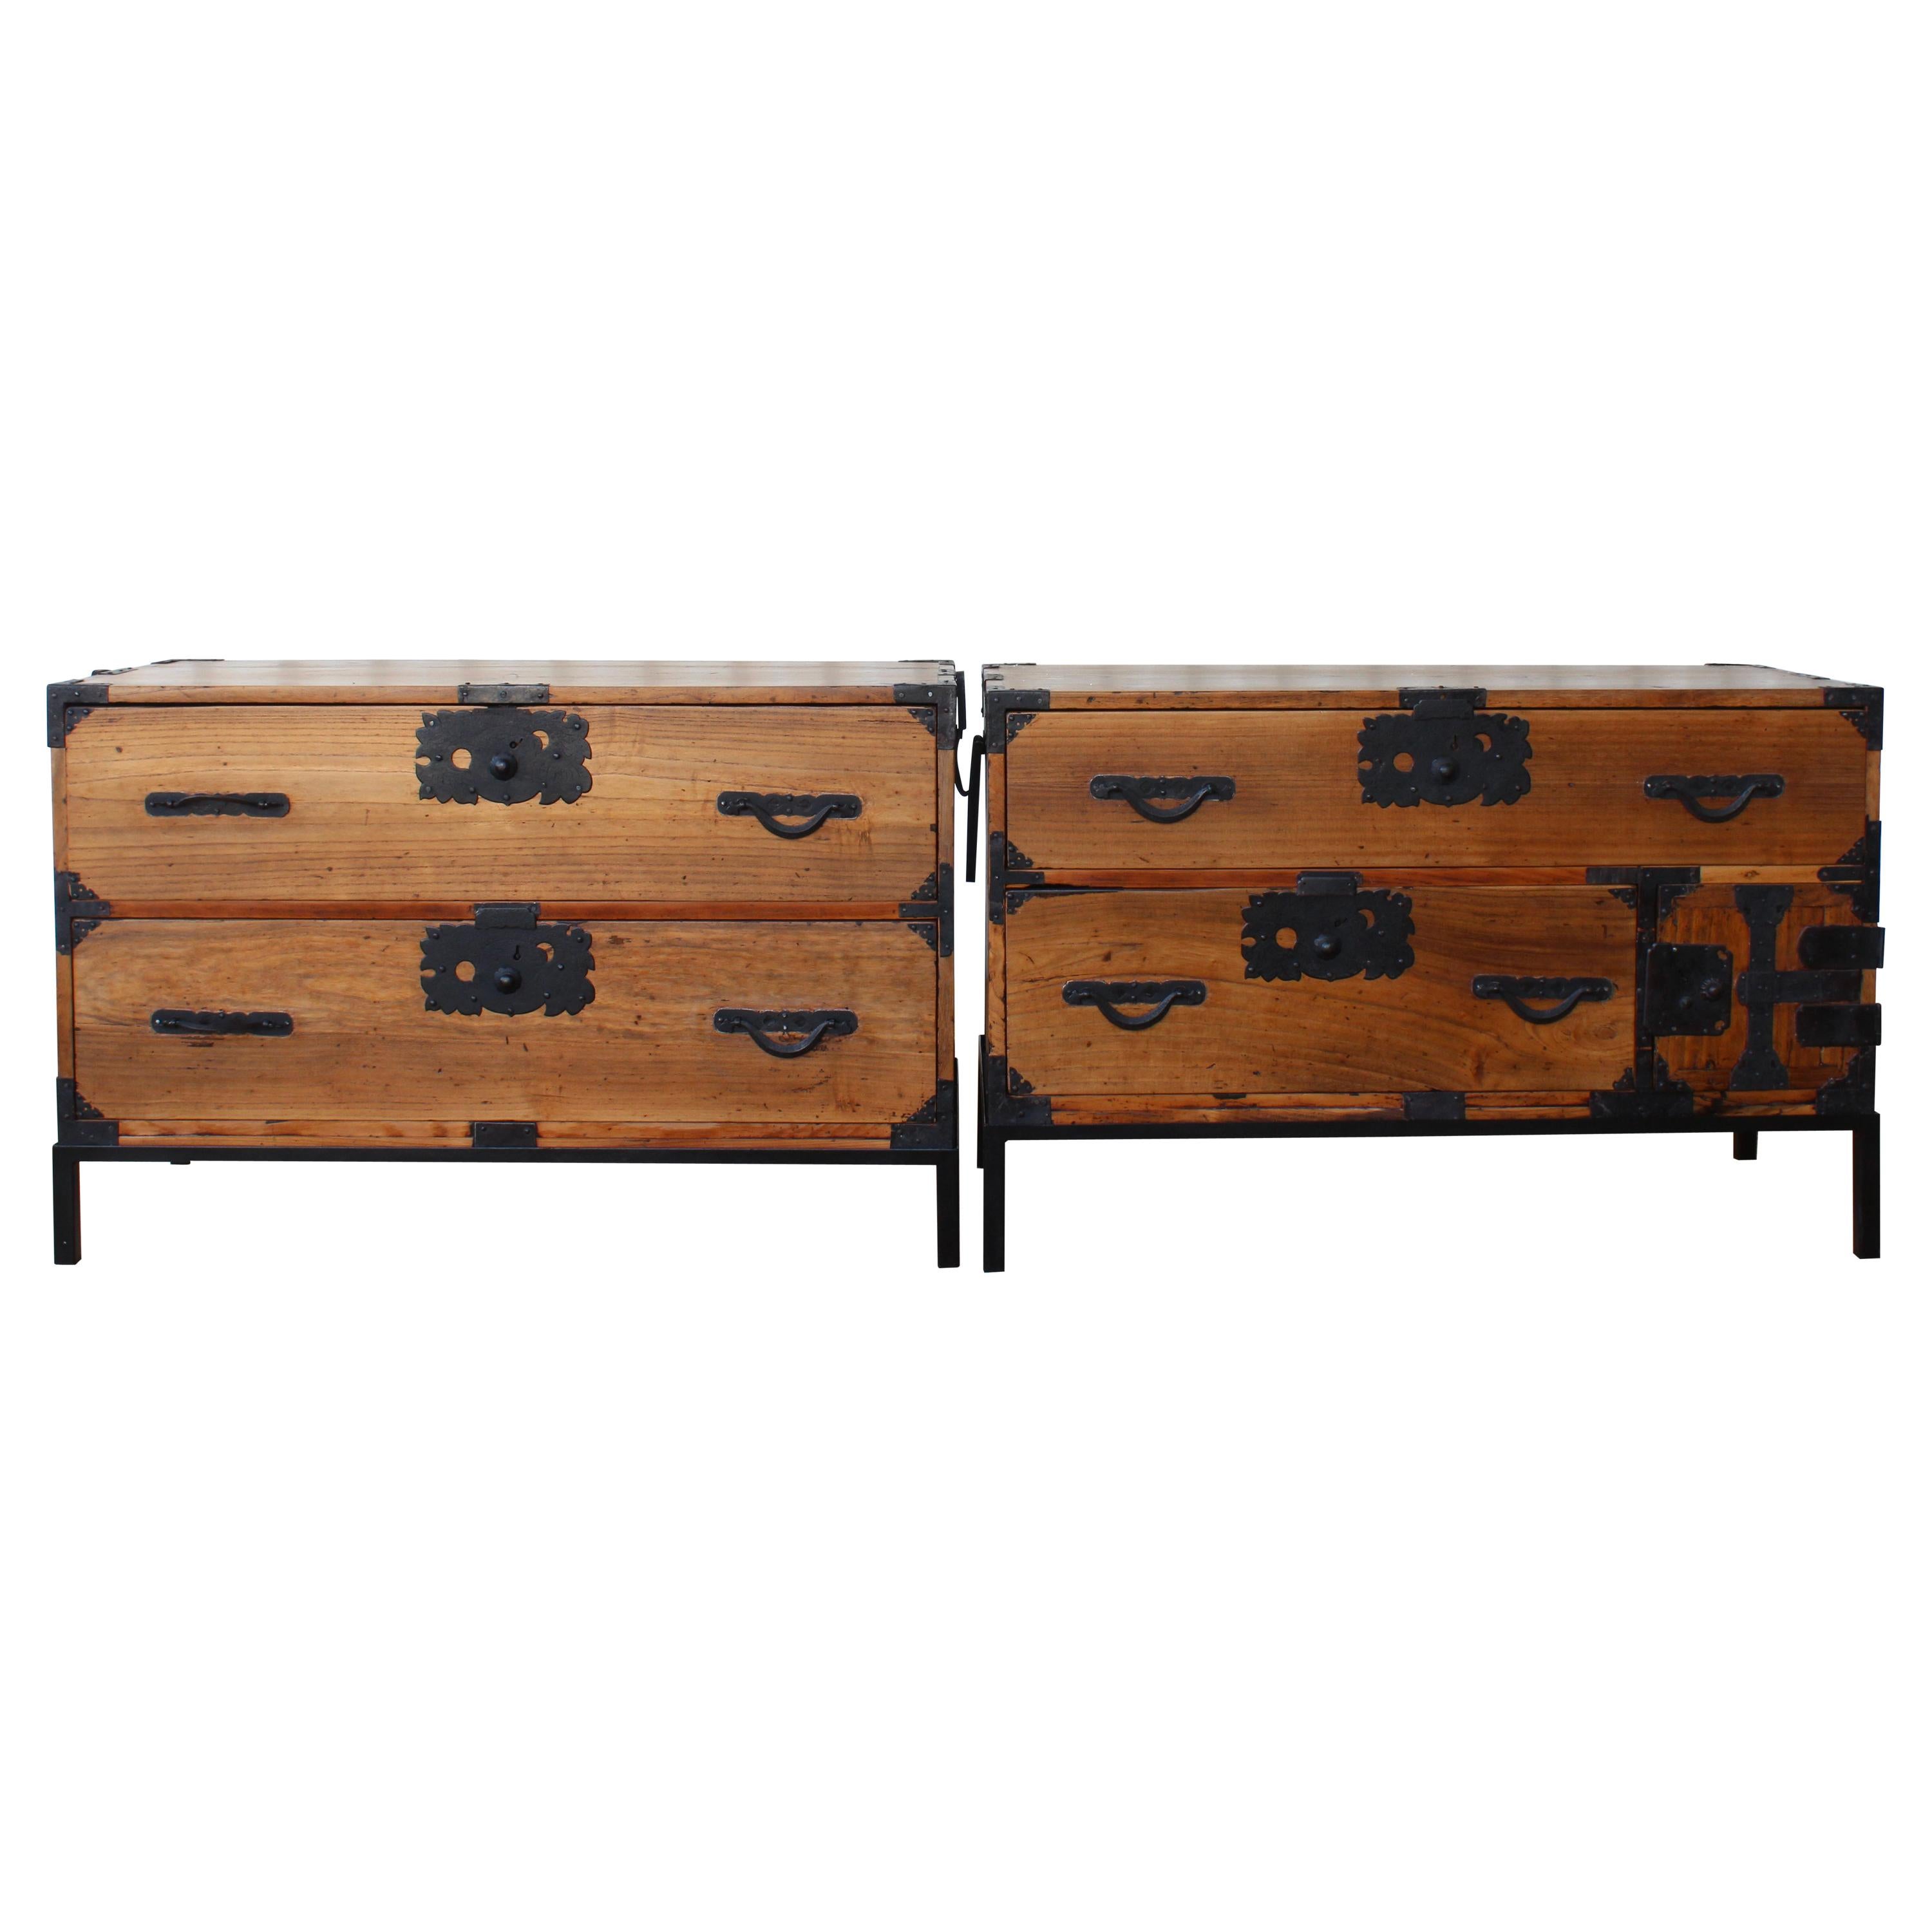 Pair of Late 19th Century Japanese Tansu Chests